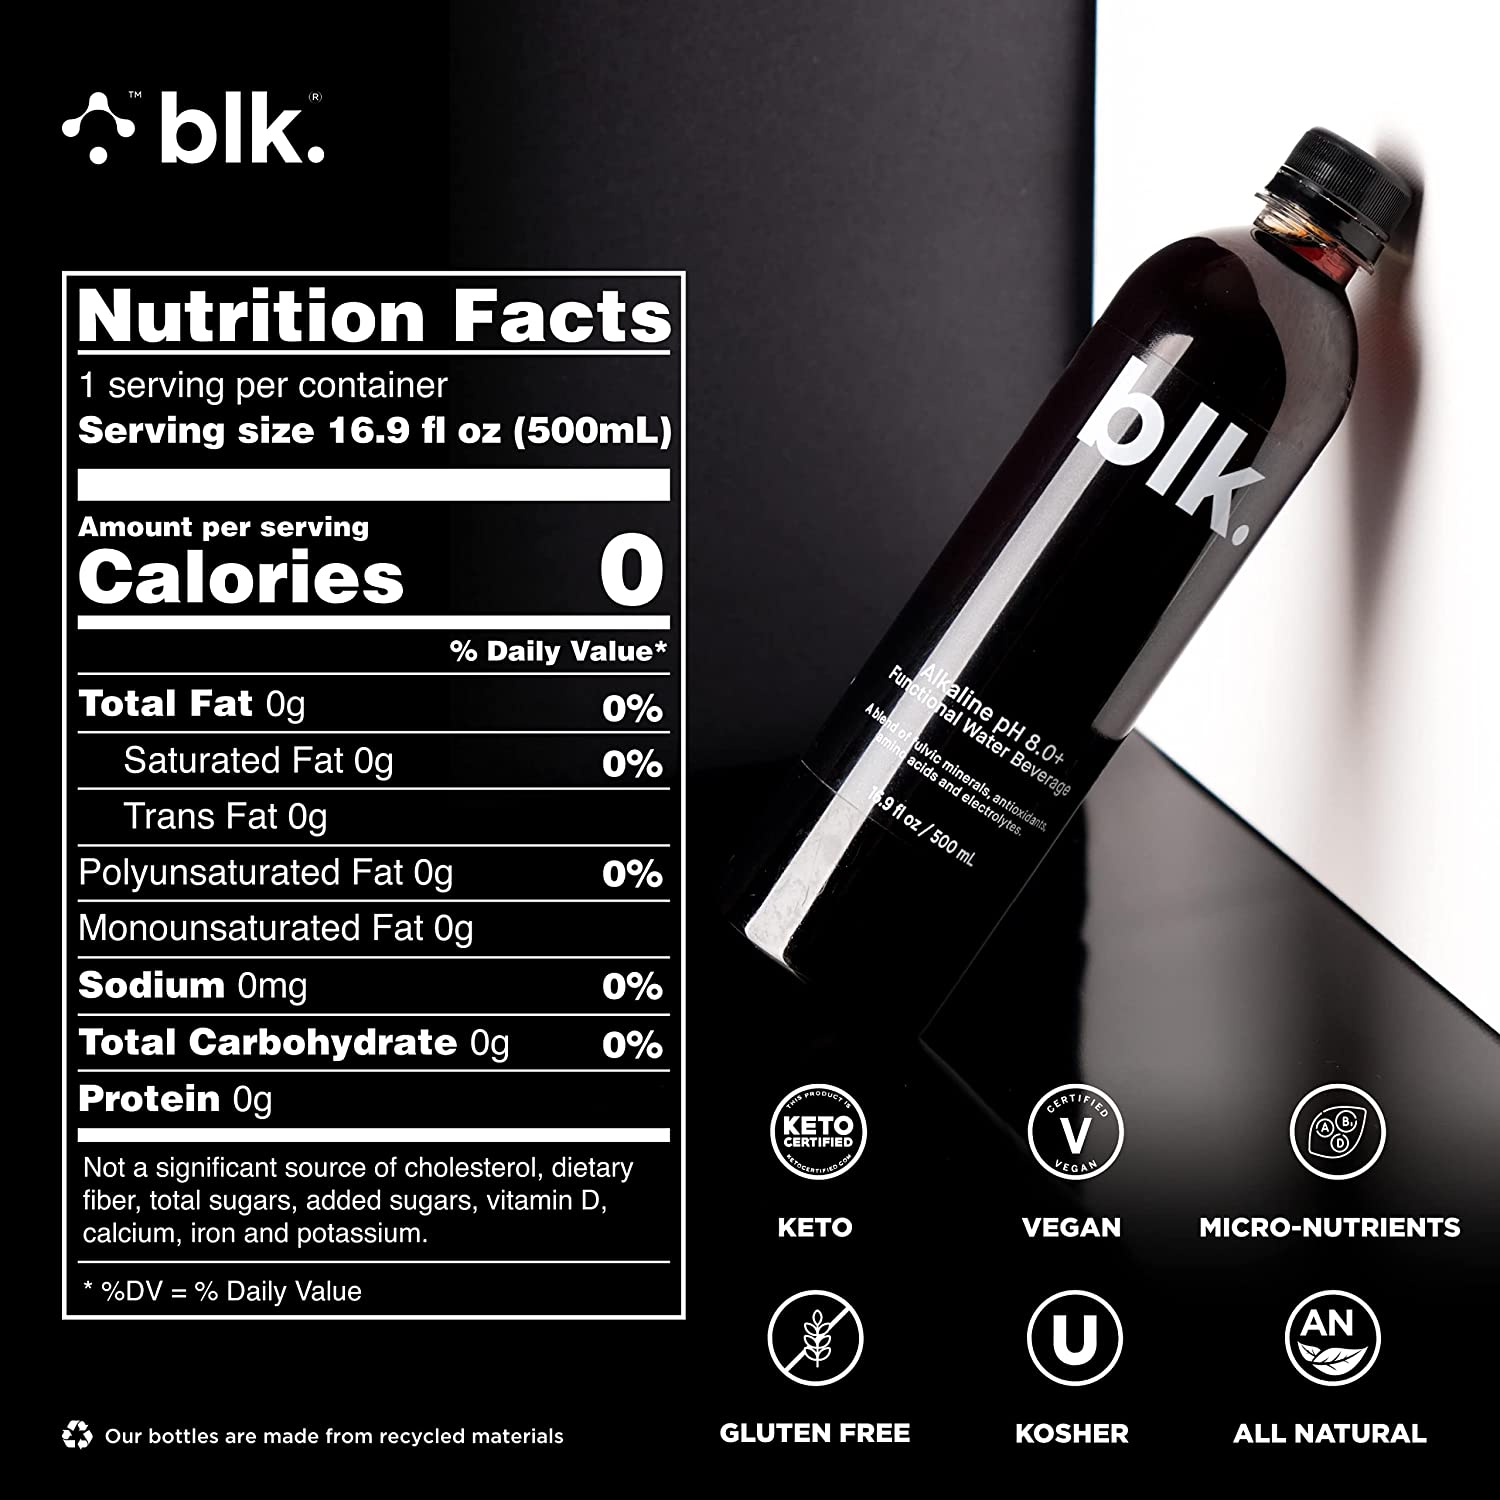 blk water nutritional information - nutrition facts - keto, vegan, micro-nutrients, gluten free, kosher, all natural